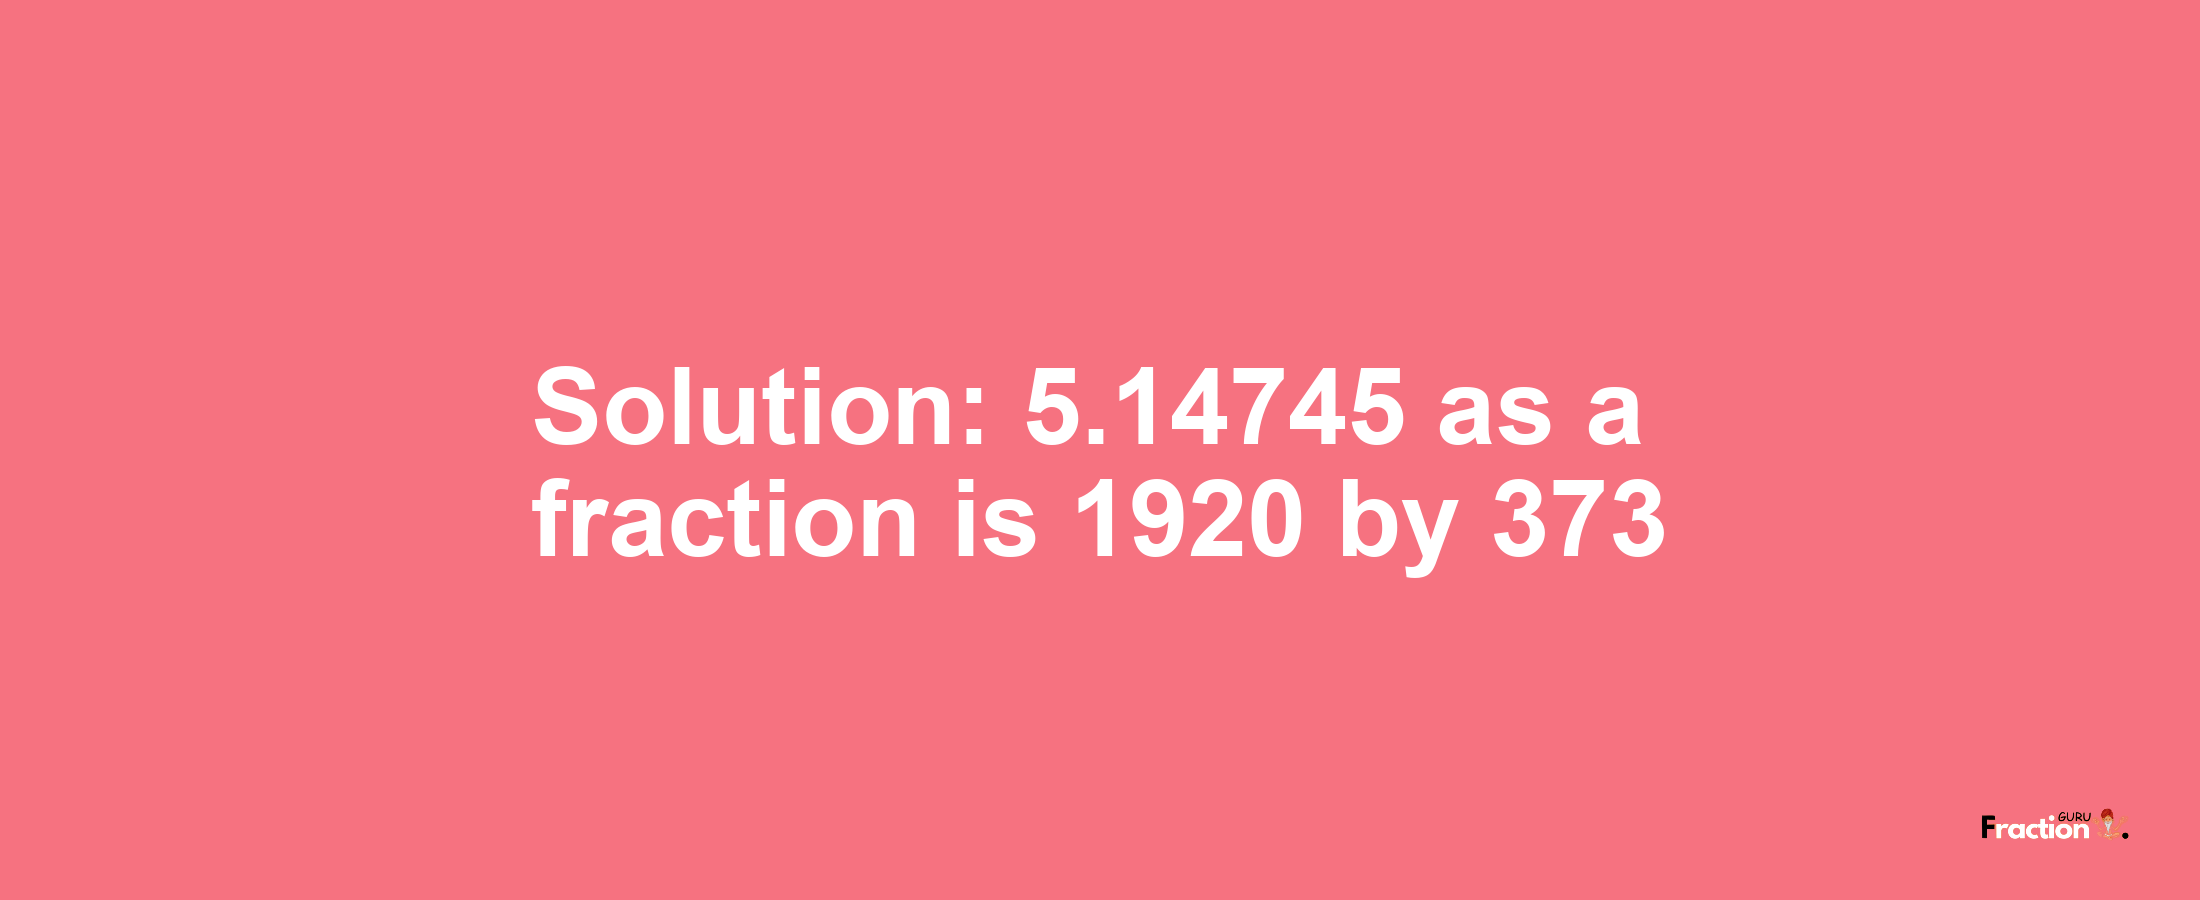 Solution:5.14745 as a fraction is 1920/373